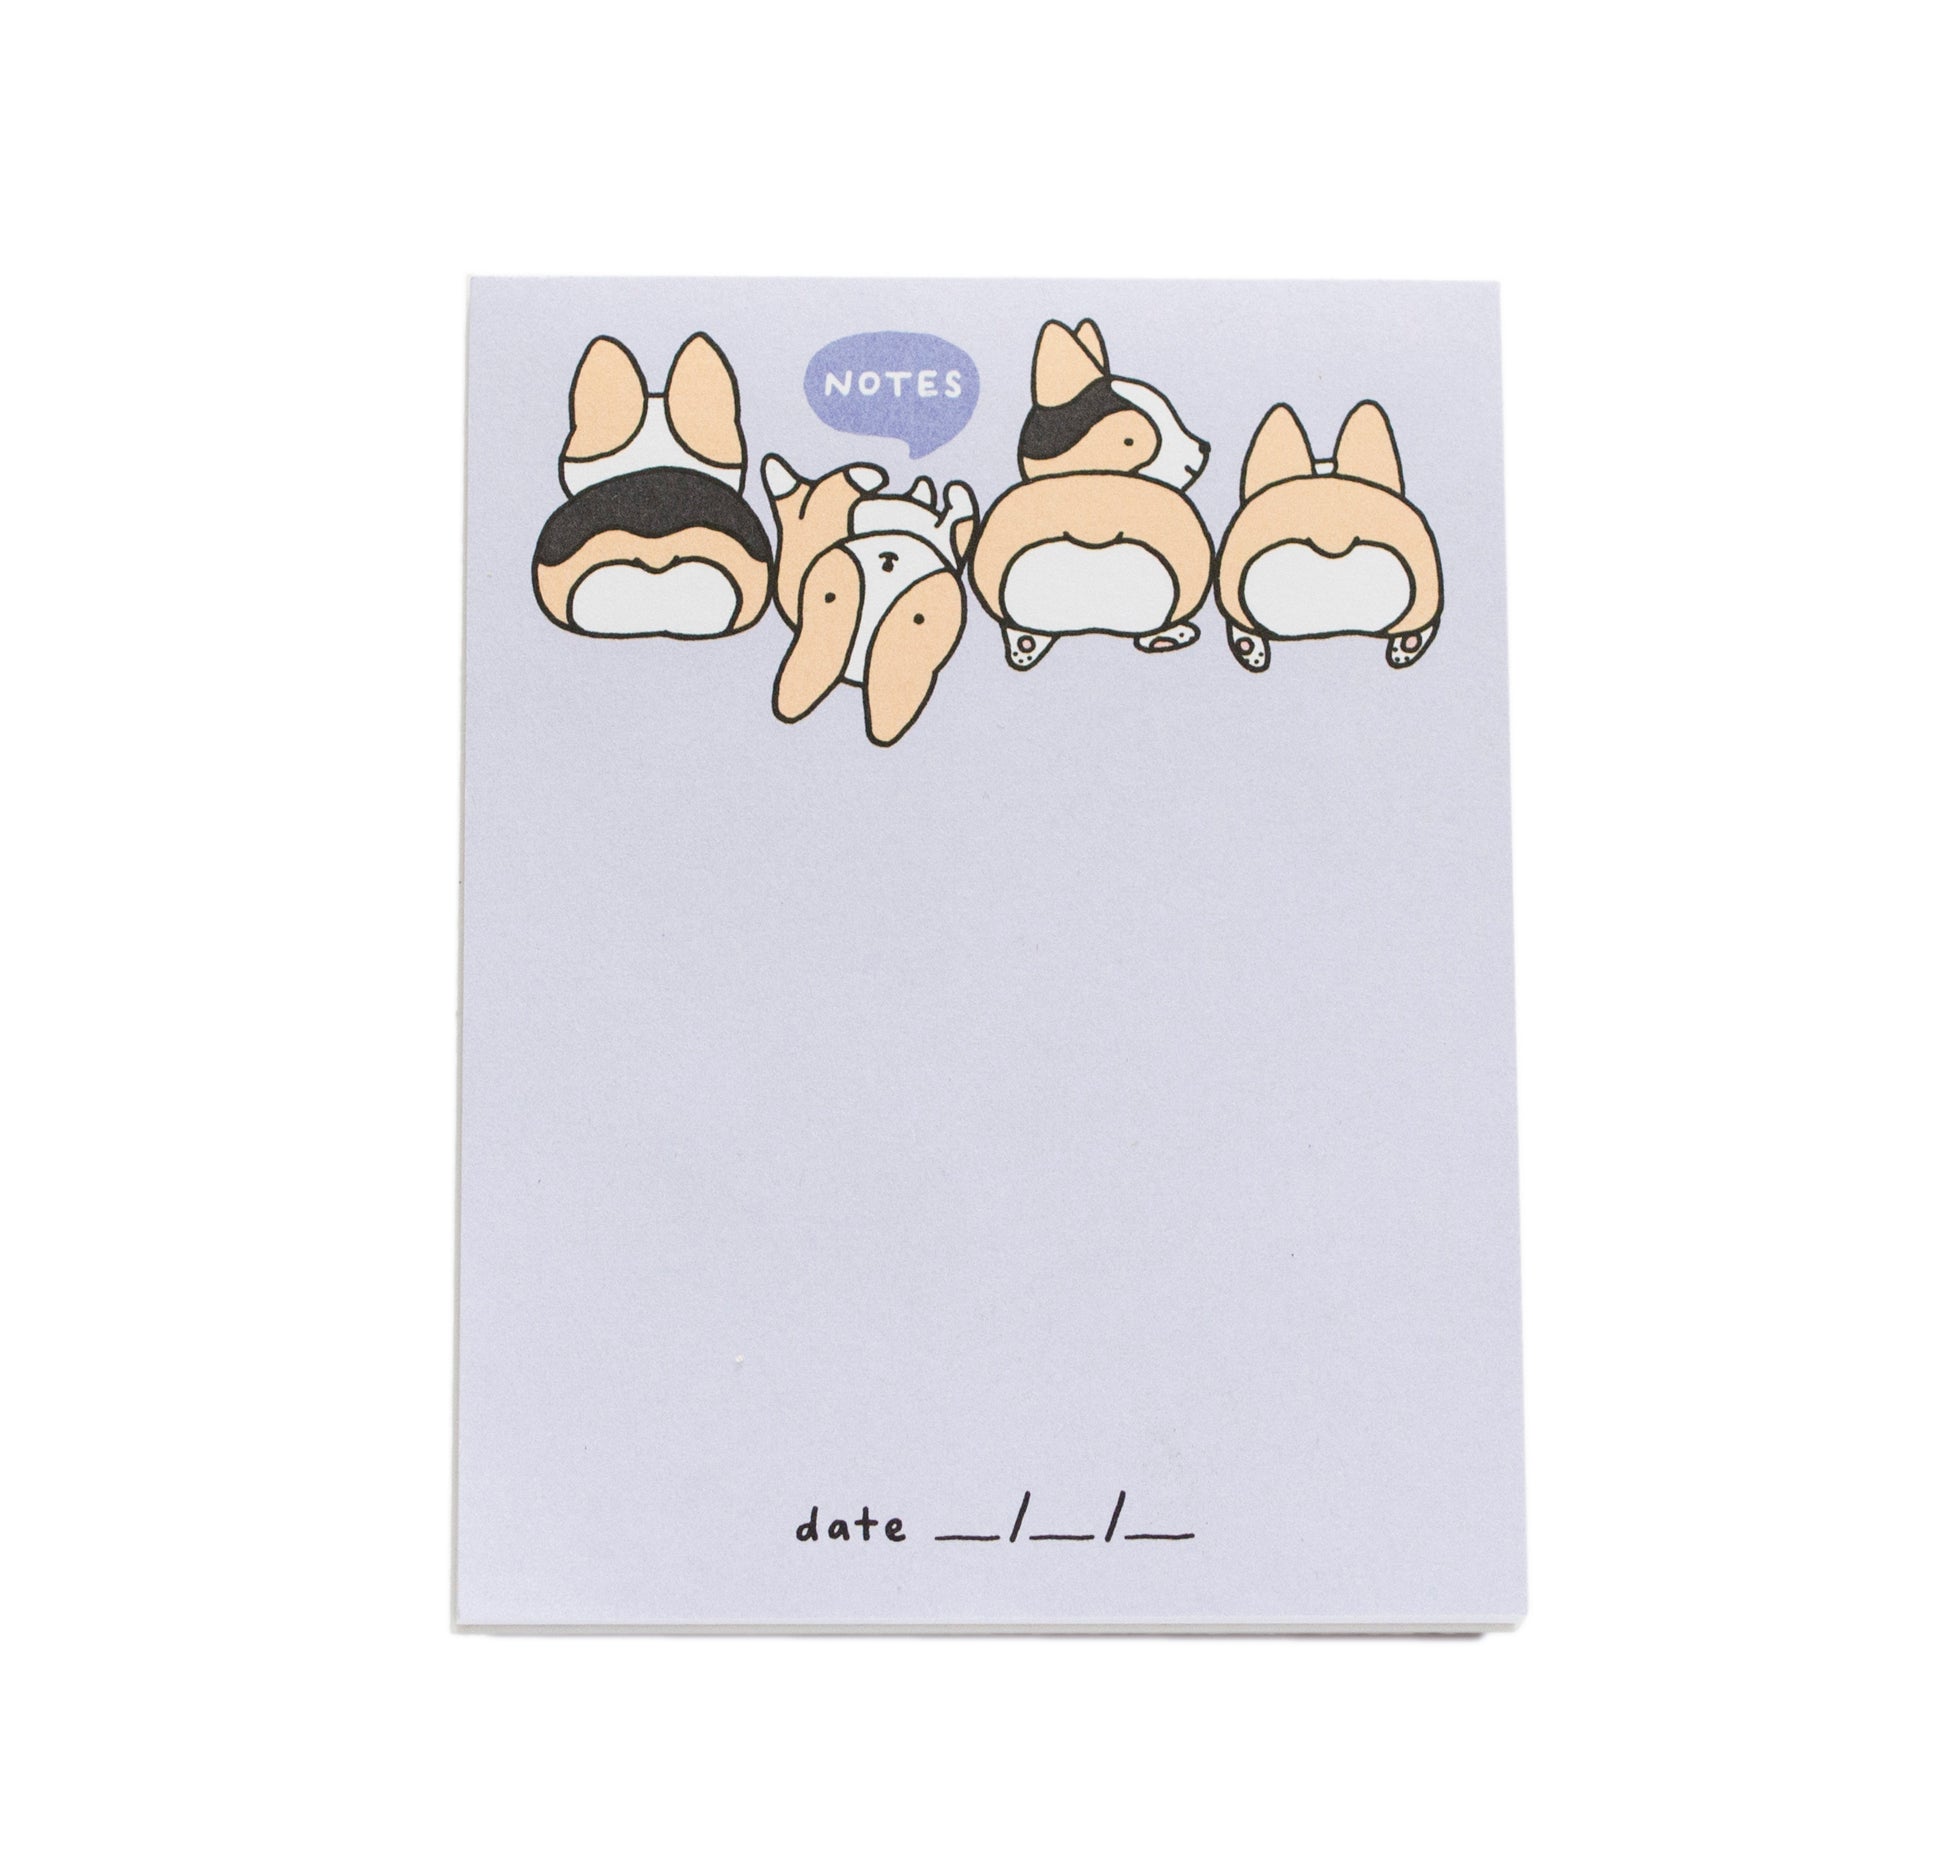 blank notepad that has a light purple background with four corgis across the top and a quote bubble reads 'notes' and a spot for the date